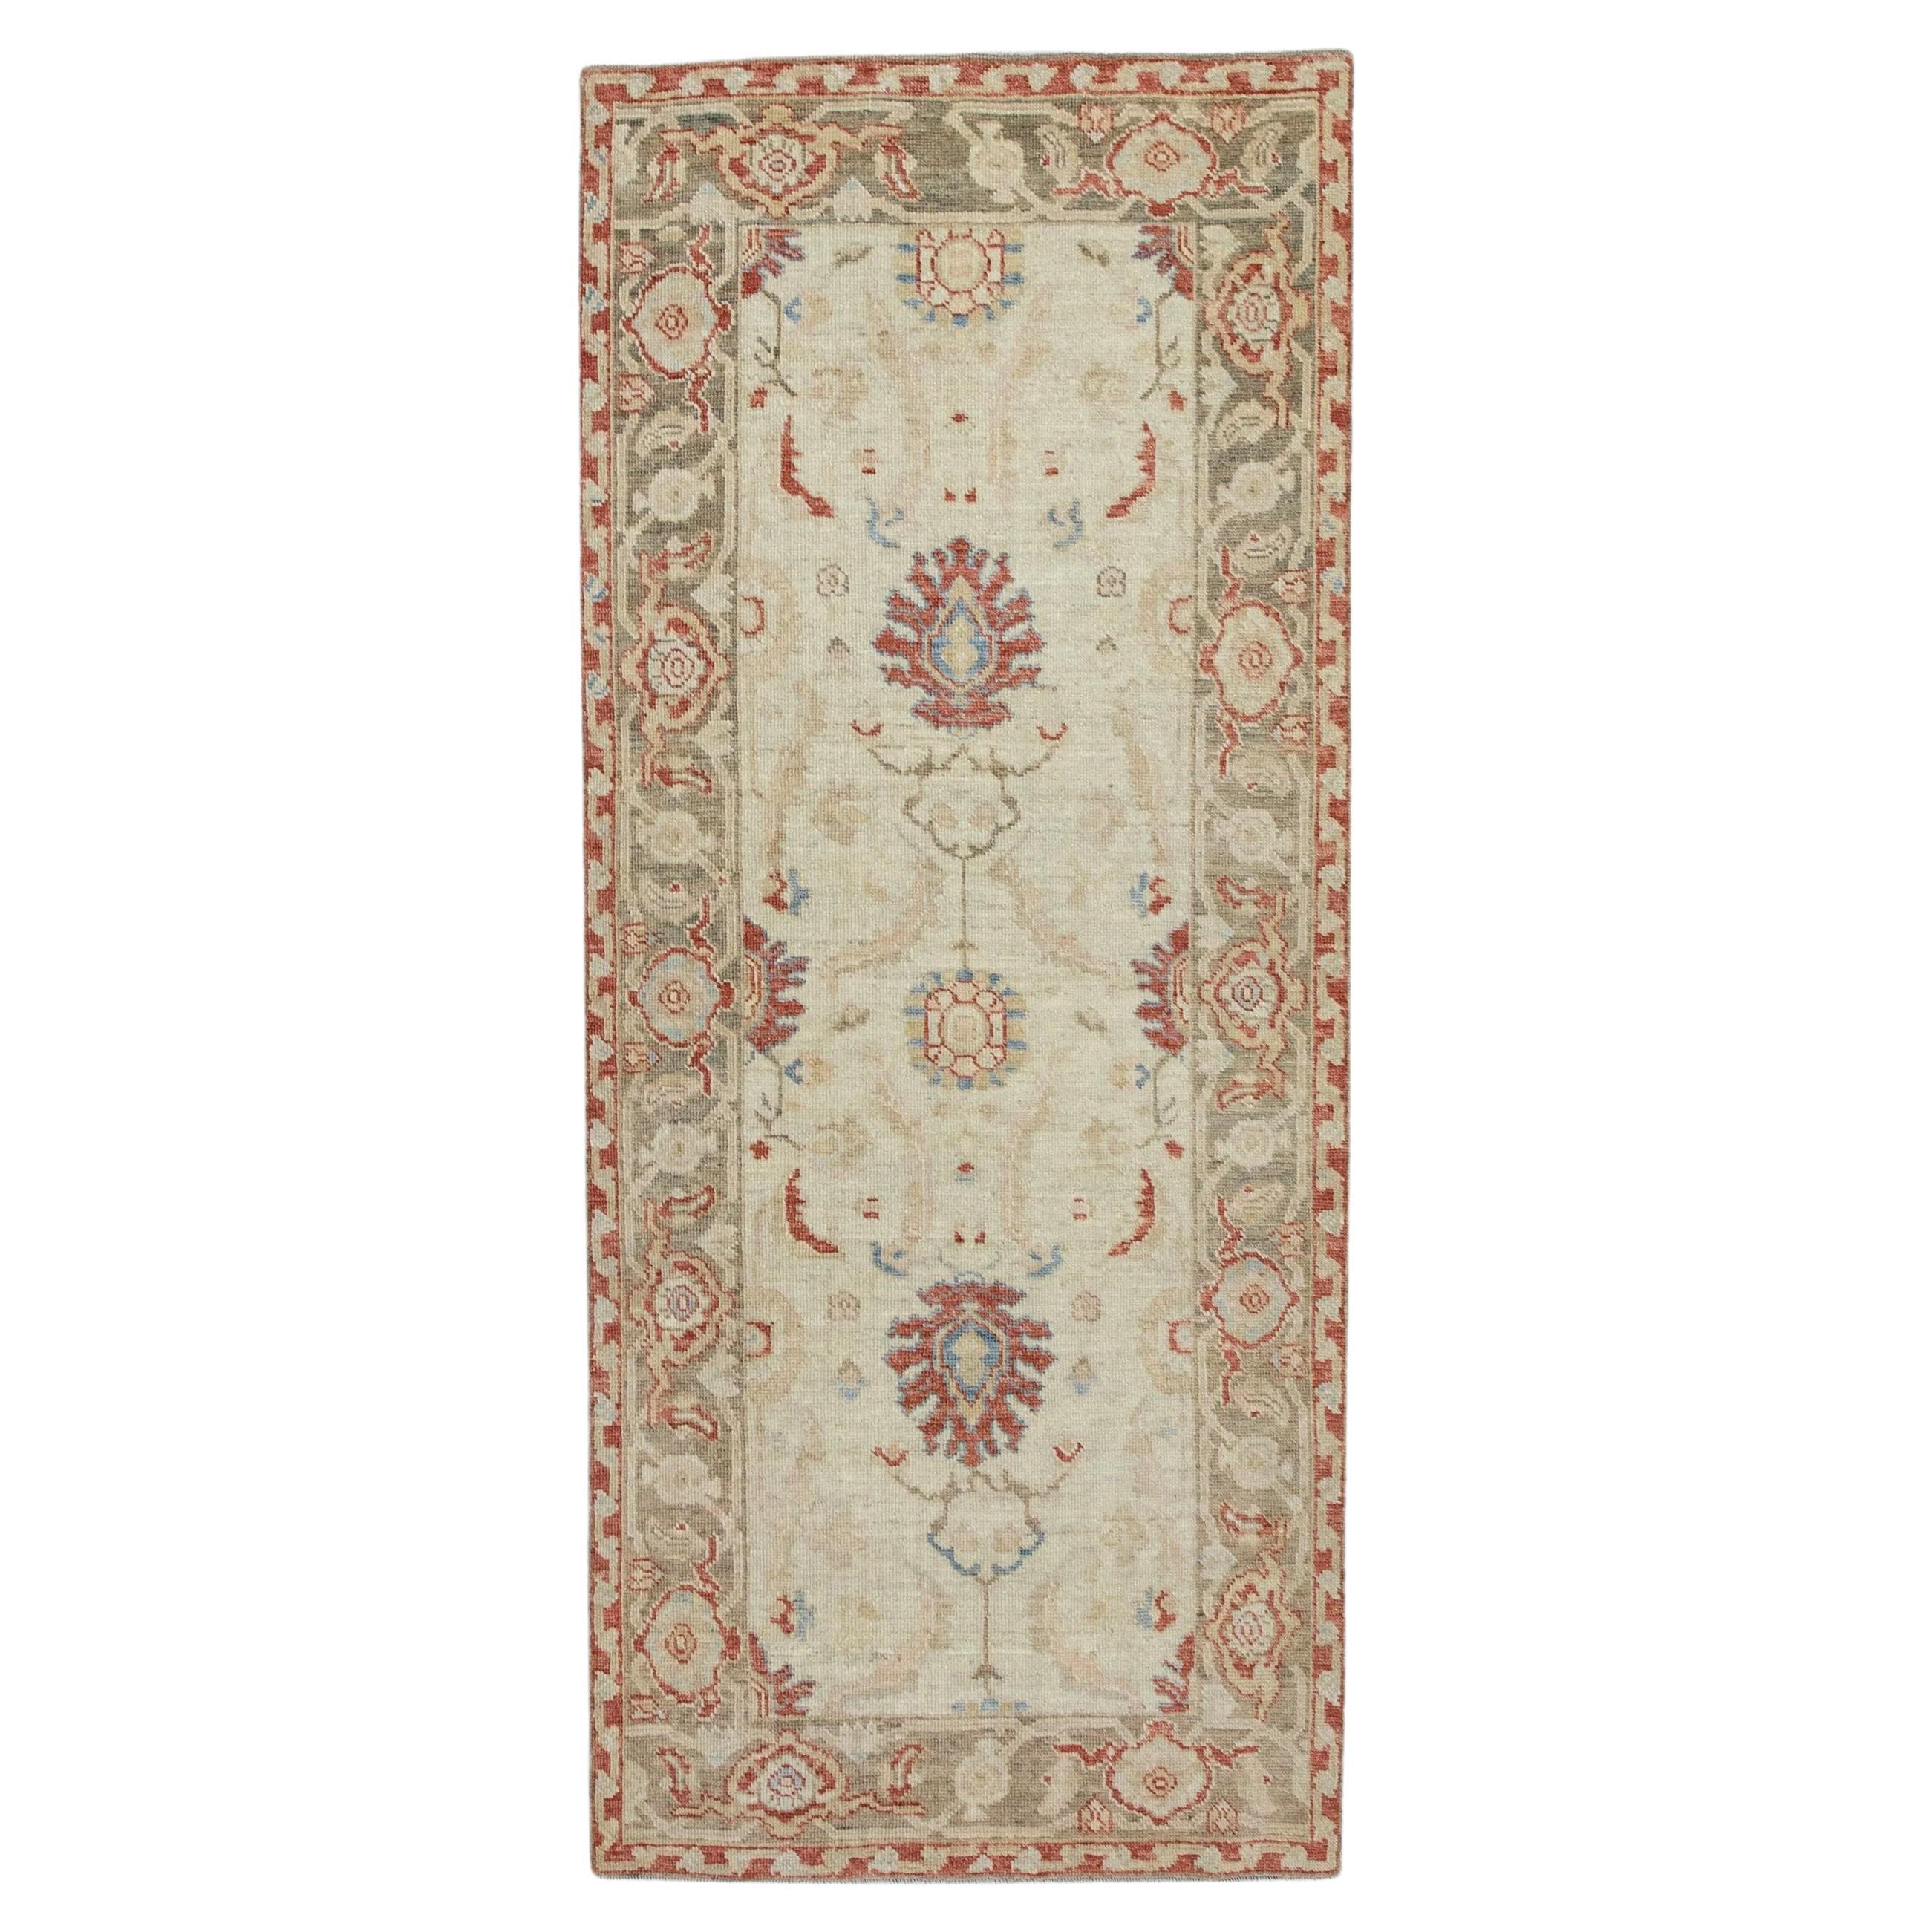 Floral Turkish Finewoven Wool Oushak Rug in Red, Cream, and Green 2'8" x 6'2" For Sale